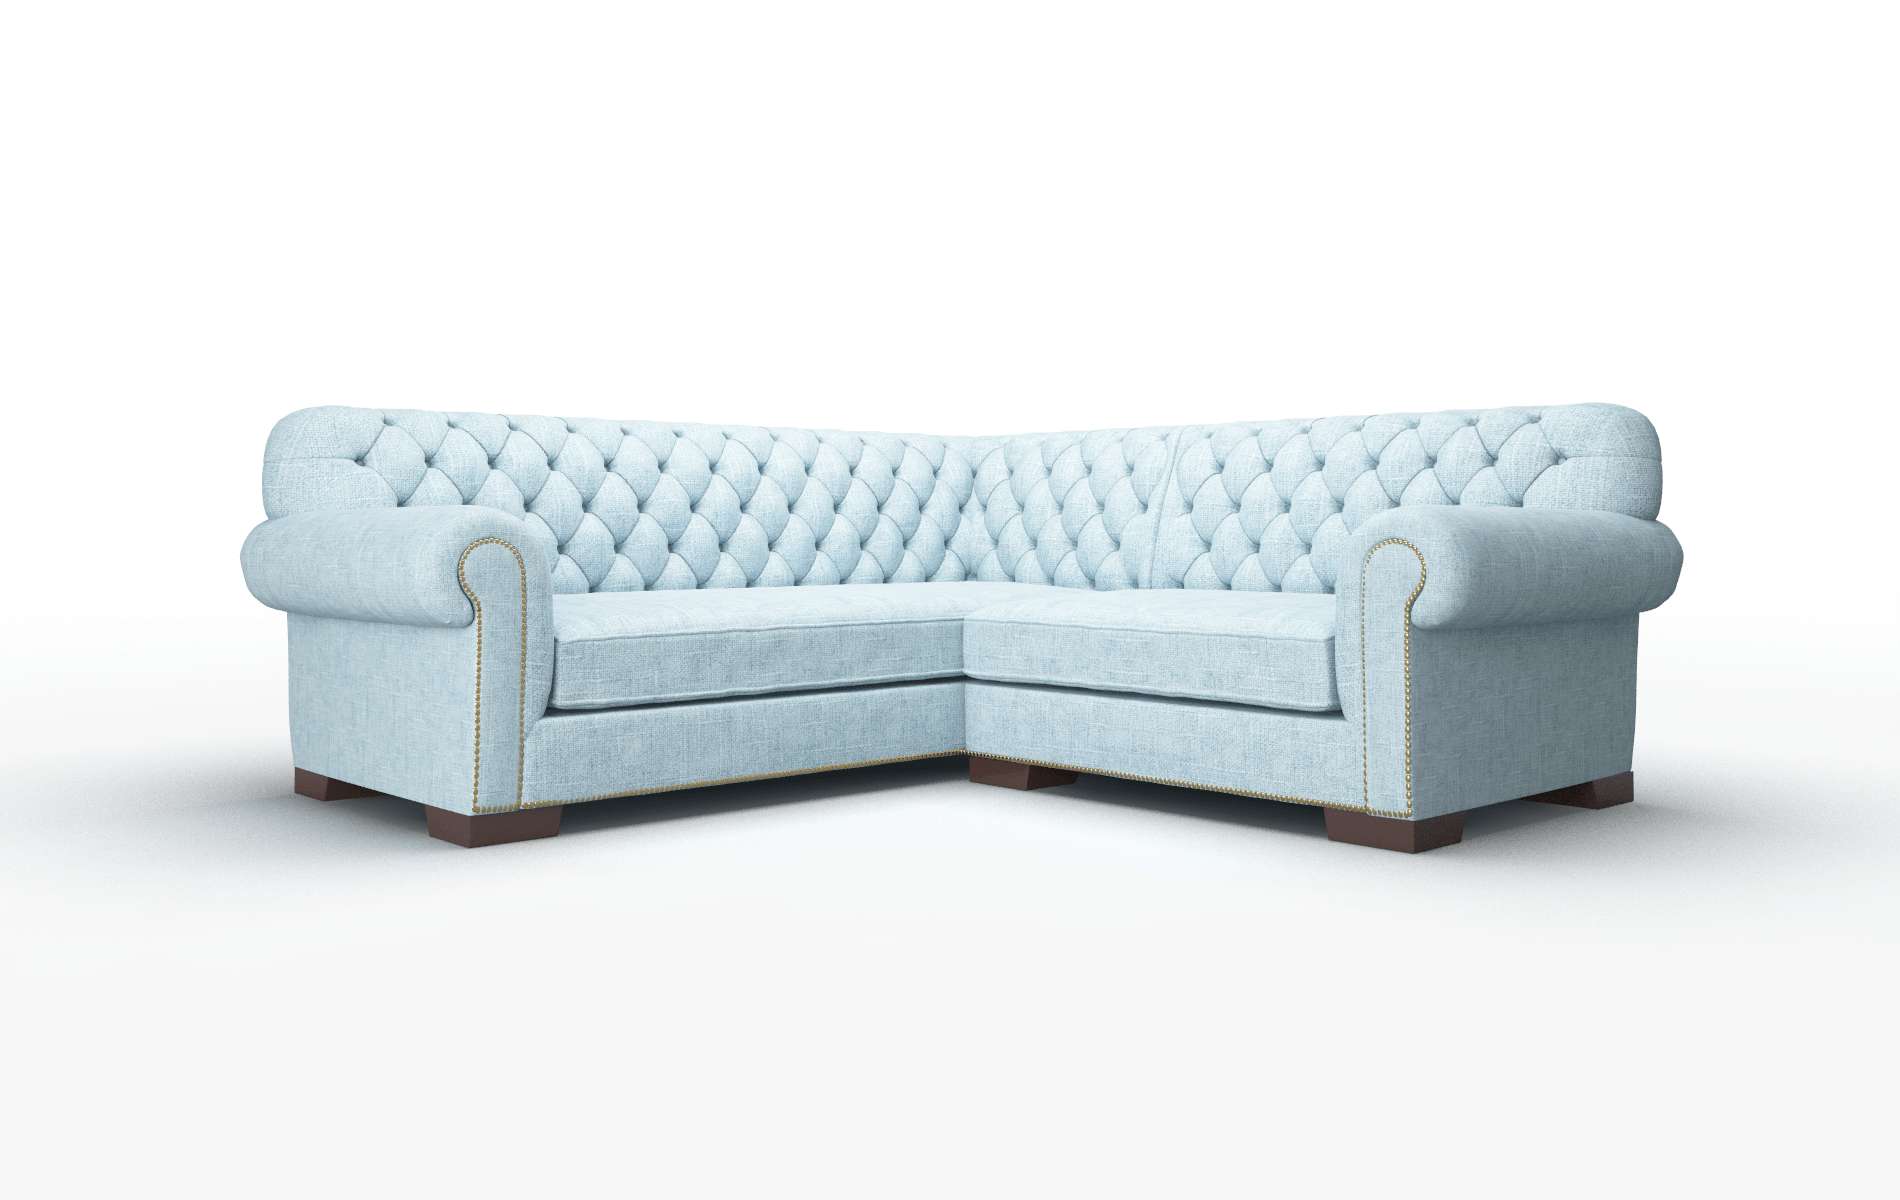 Chester Atlas Turquoise Sectional espresso legs